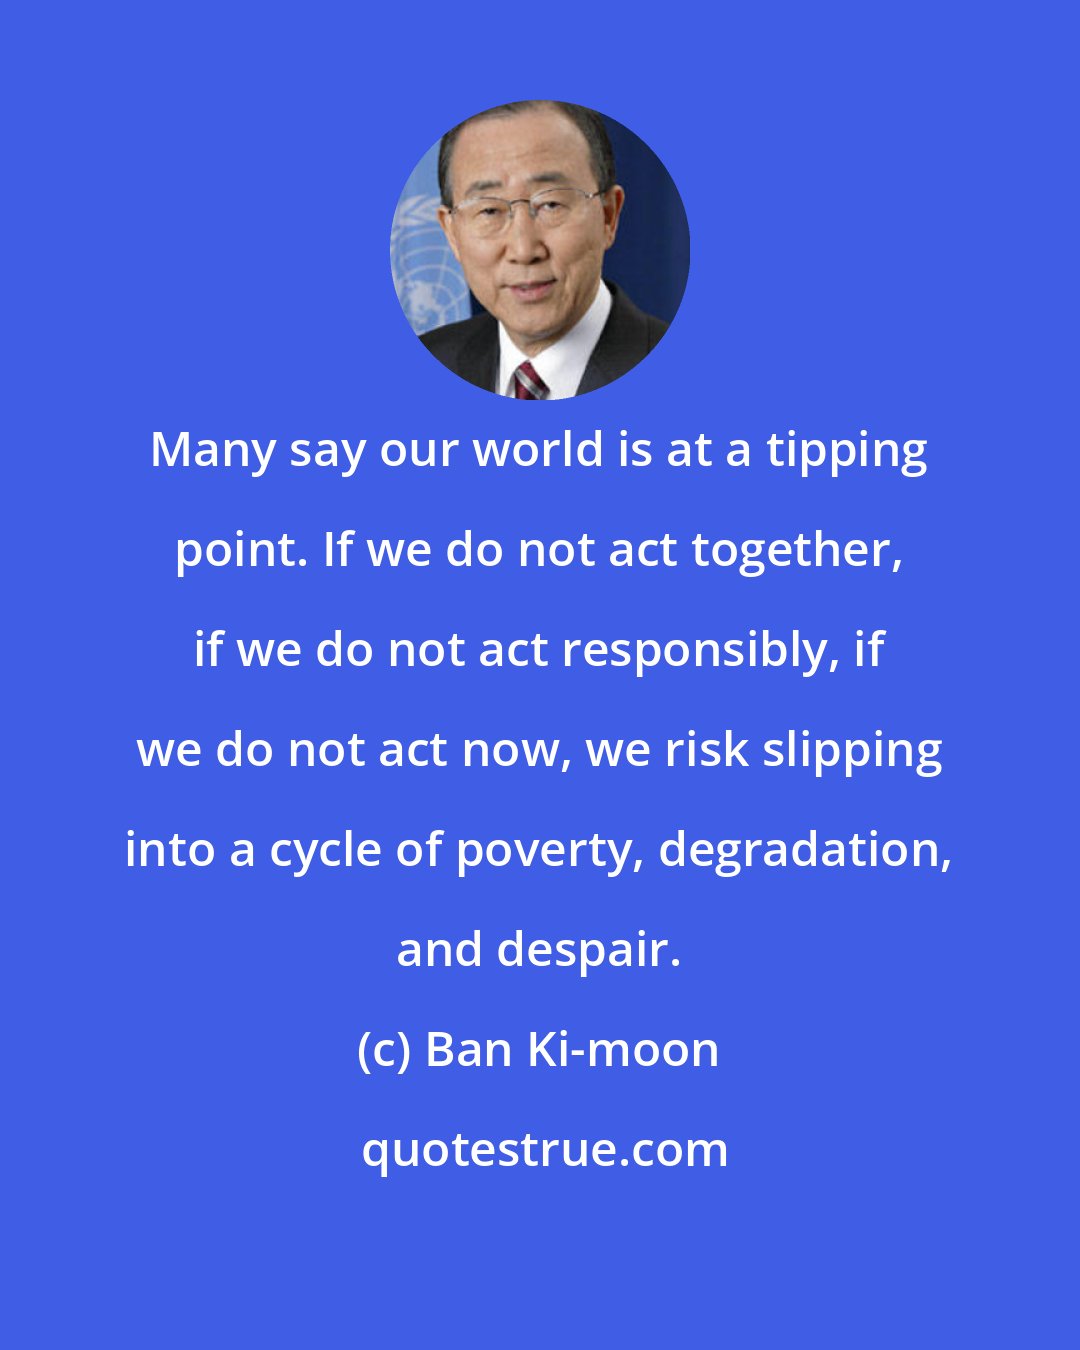 Ban Ki-moon: Many say our world is at a tipping point. If we do not act together, if we do not act responsibly, if we do not act now, we risk slipping into a cycle of poverty, degradation, and despair.